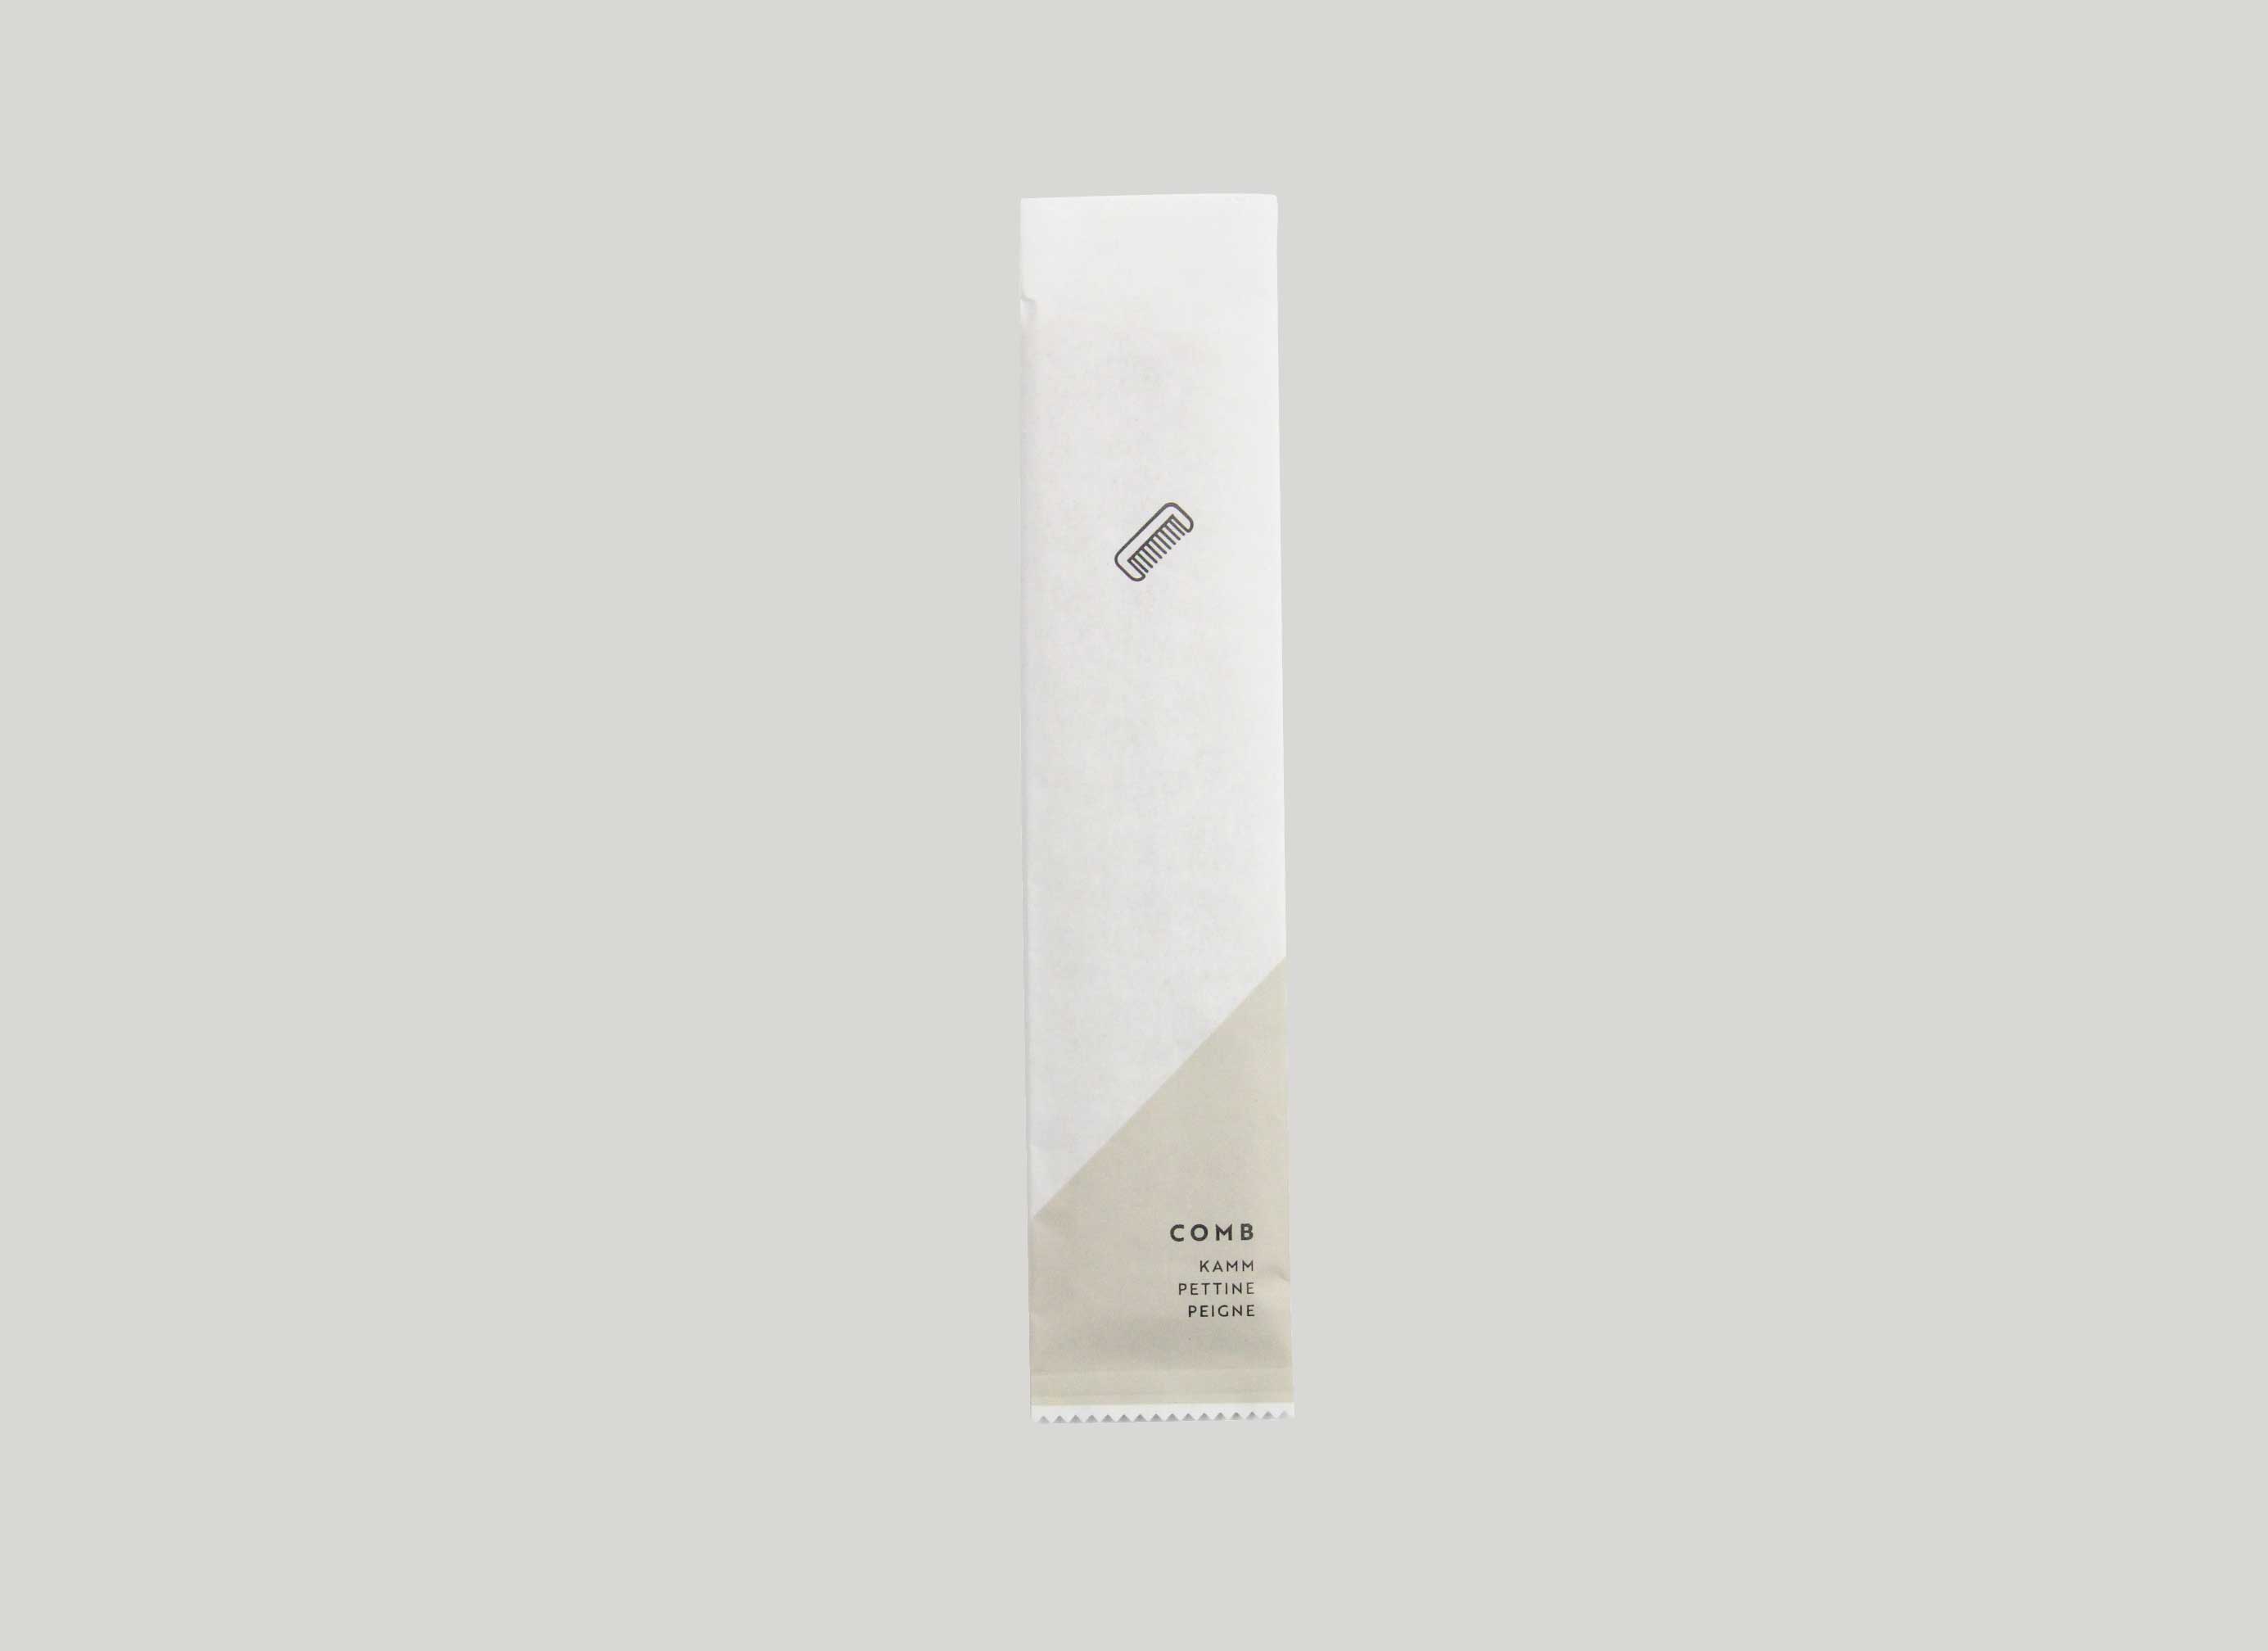 BASIC PAPER - Comb made with 35% straw, length 15,5cm, in paper sachet